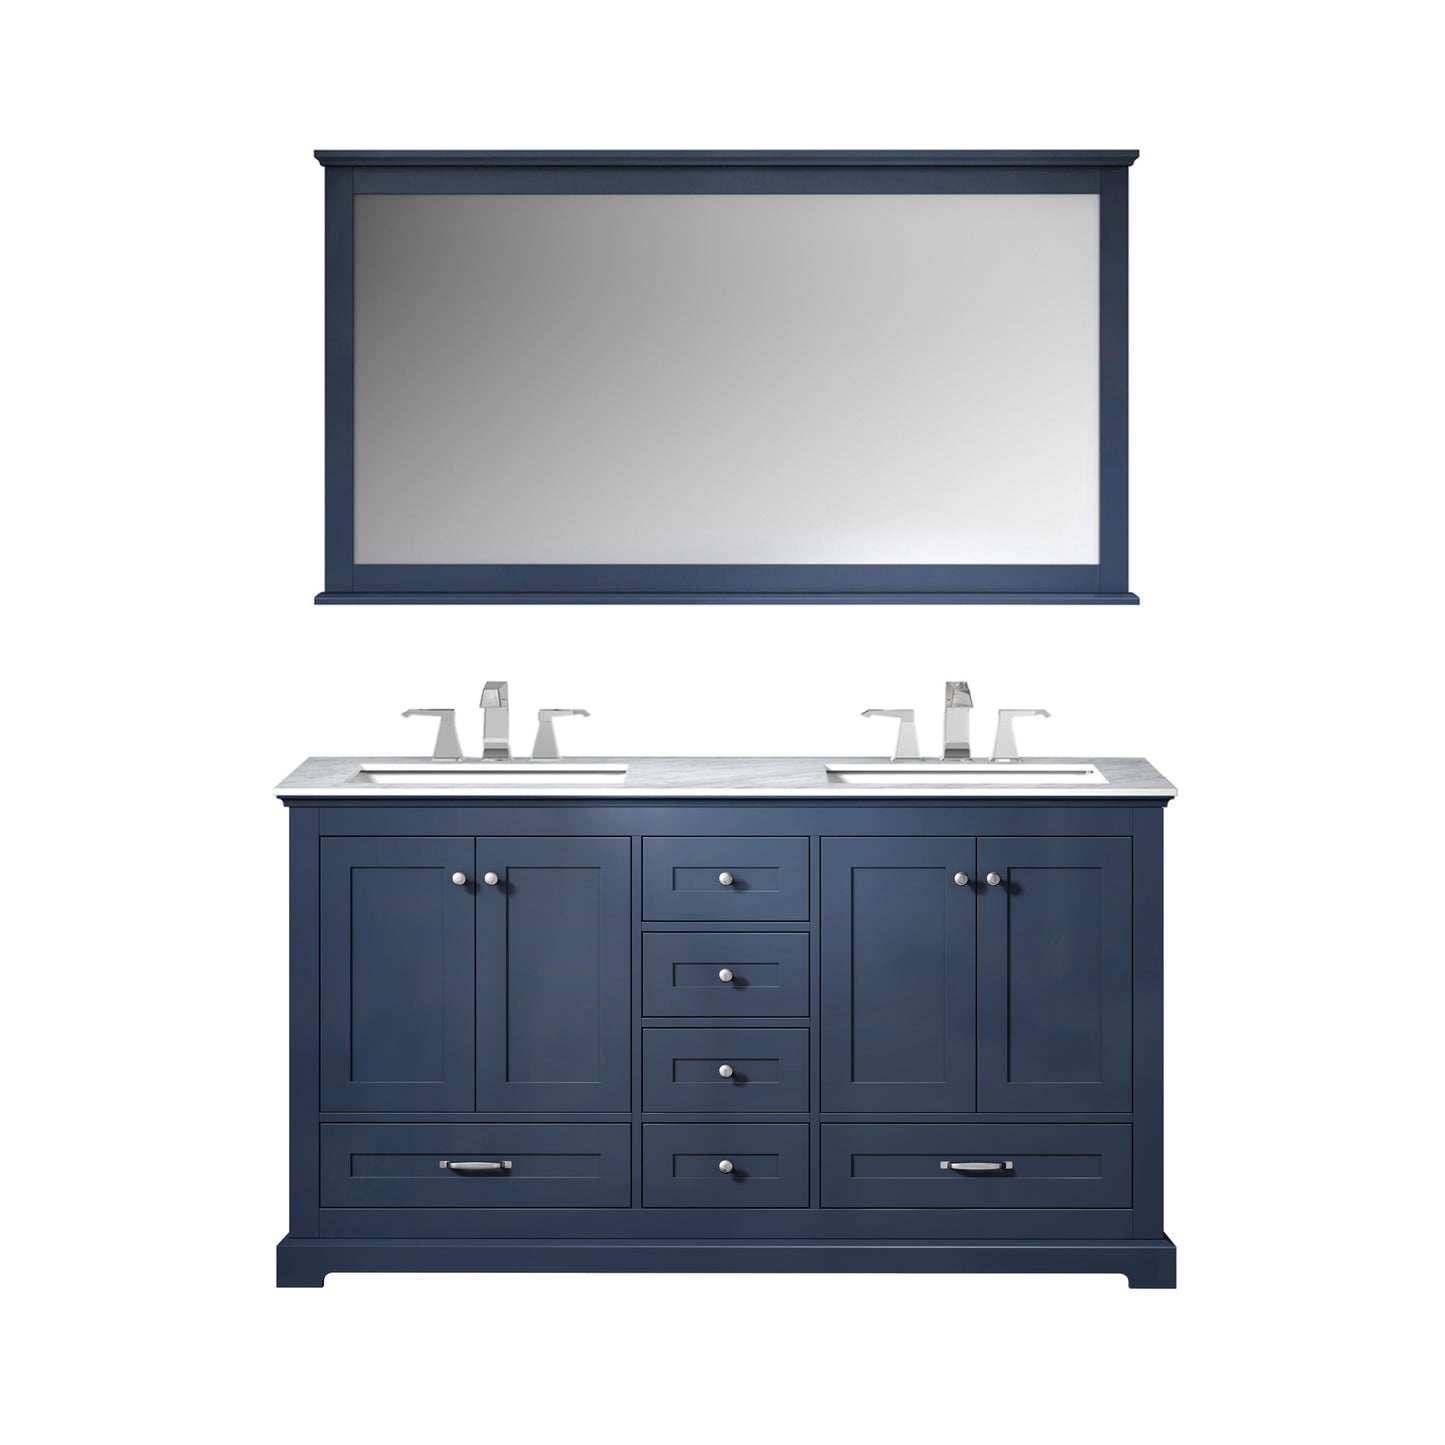 Lexora Dukes 60" Double Vanity, White Carrara Marble Top, White Square Sinks and 58" Mirror w/ Faucets - Luxe Bathroom Vanities